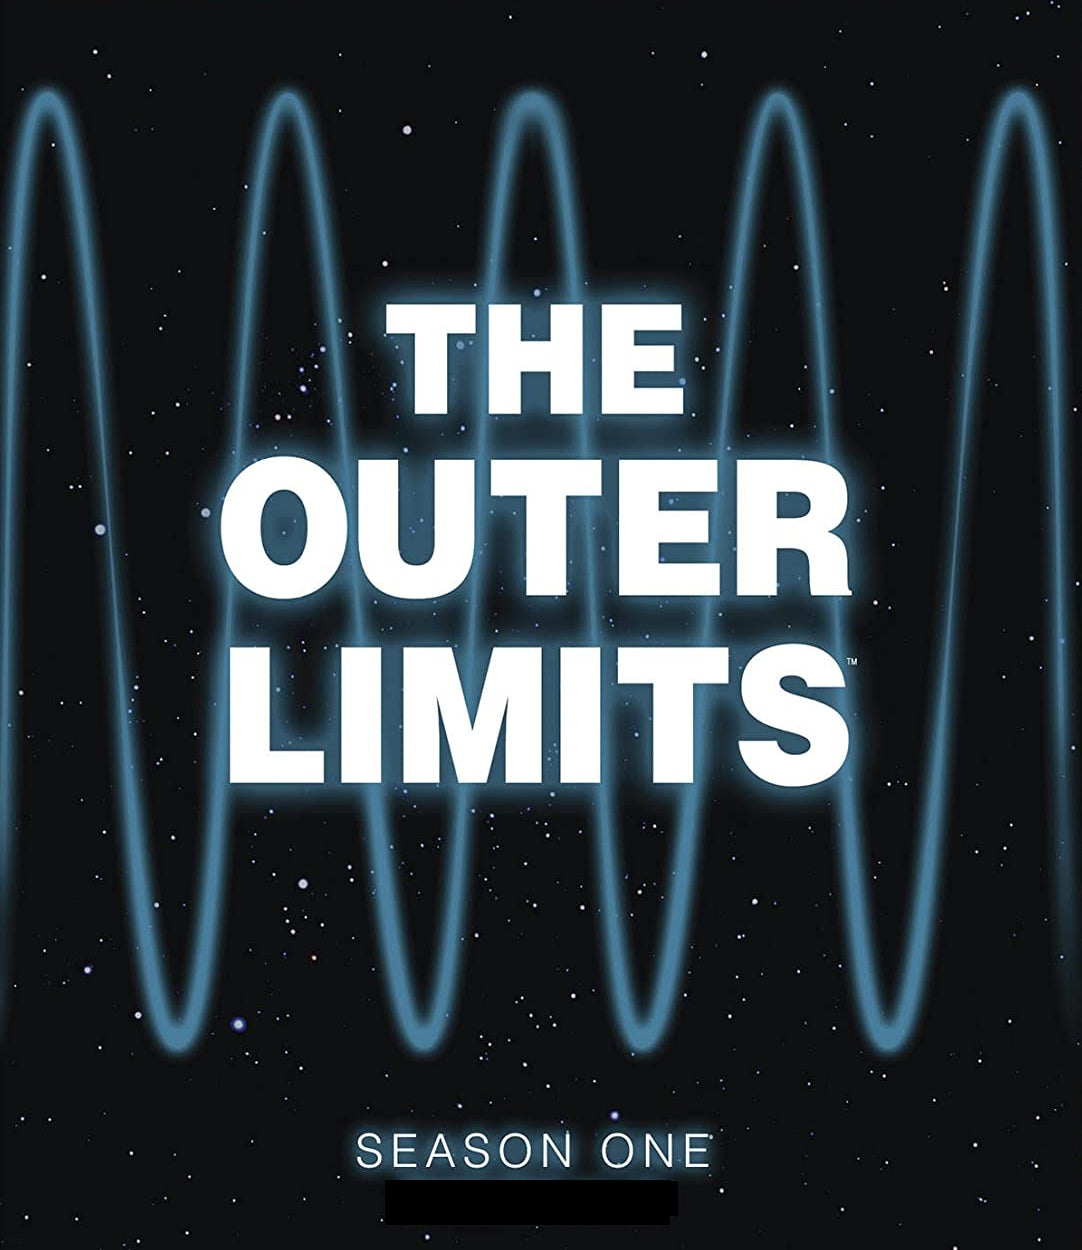 THE OUTER LIMITS SEASON ONE BLU-RAY